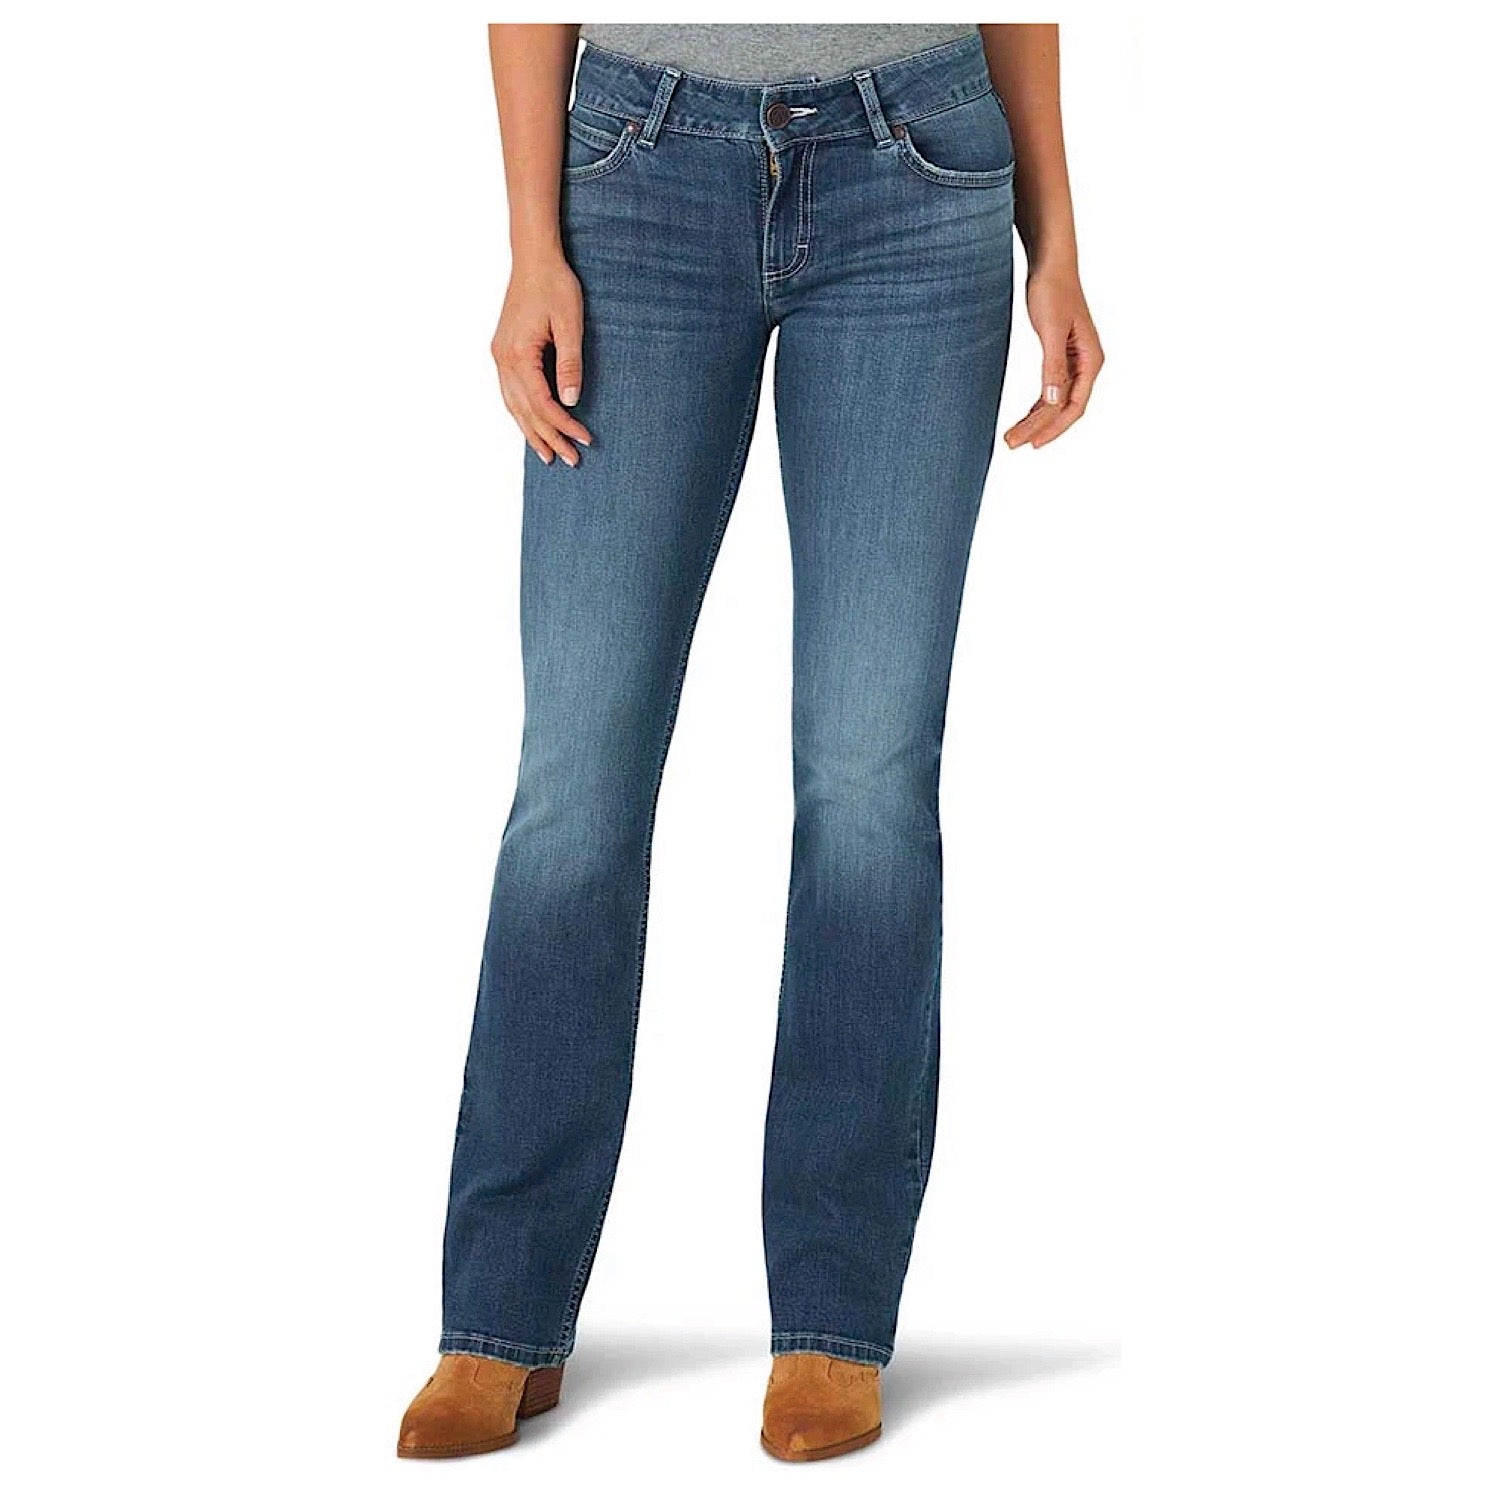 Buy Wrangler Womens Mid Rise Boot Cut Mae Jean Blaine - The Stable Door